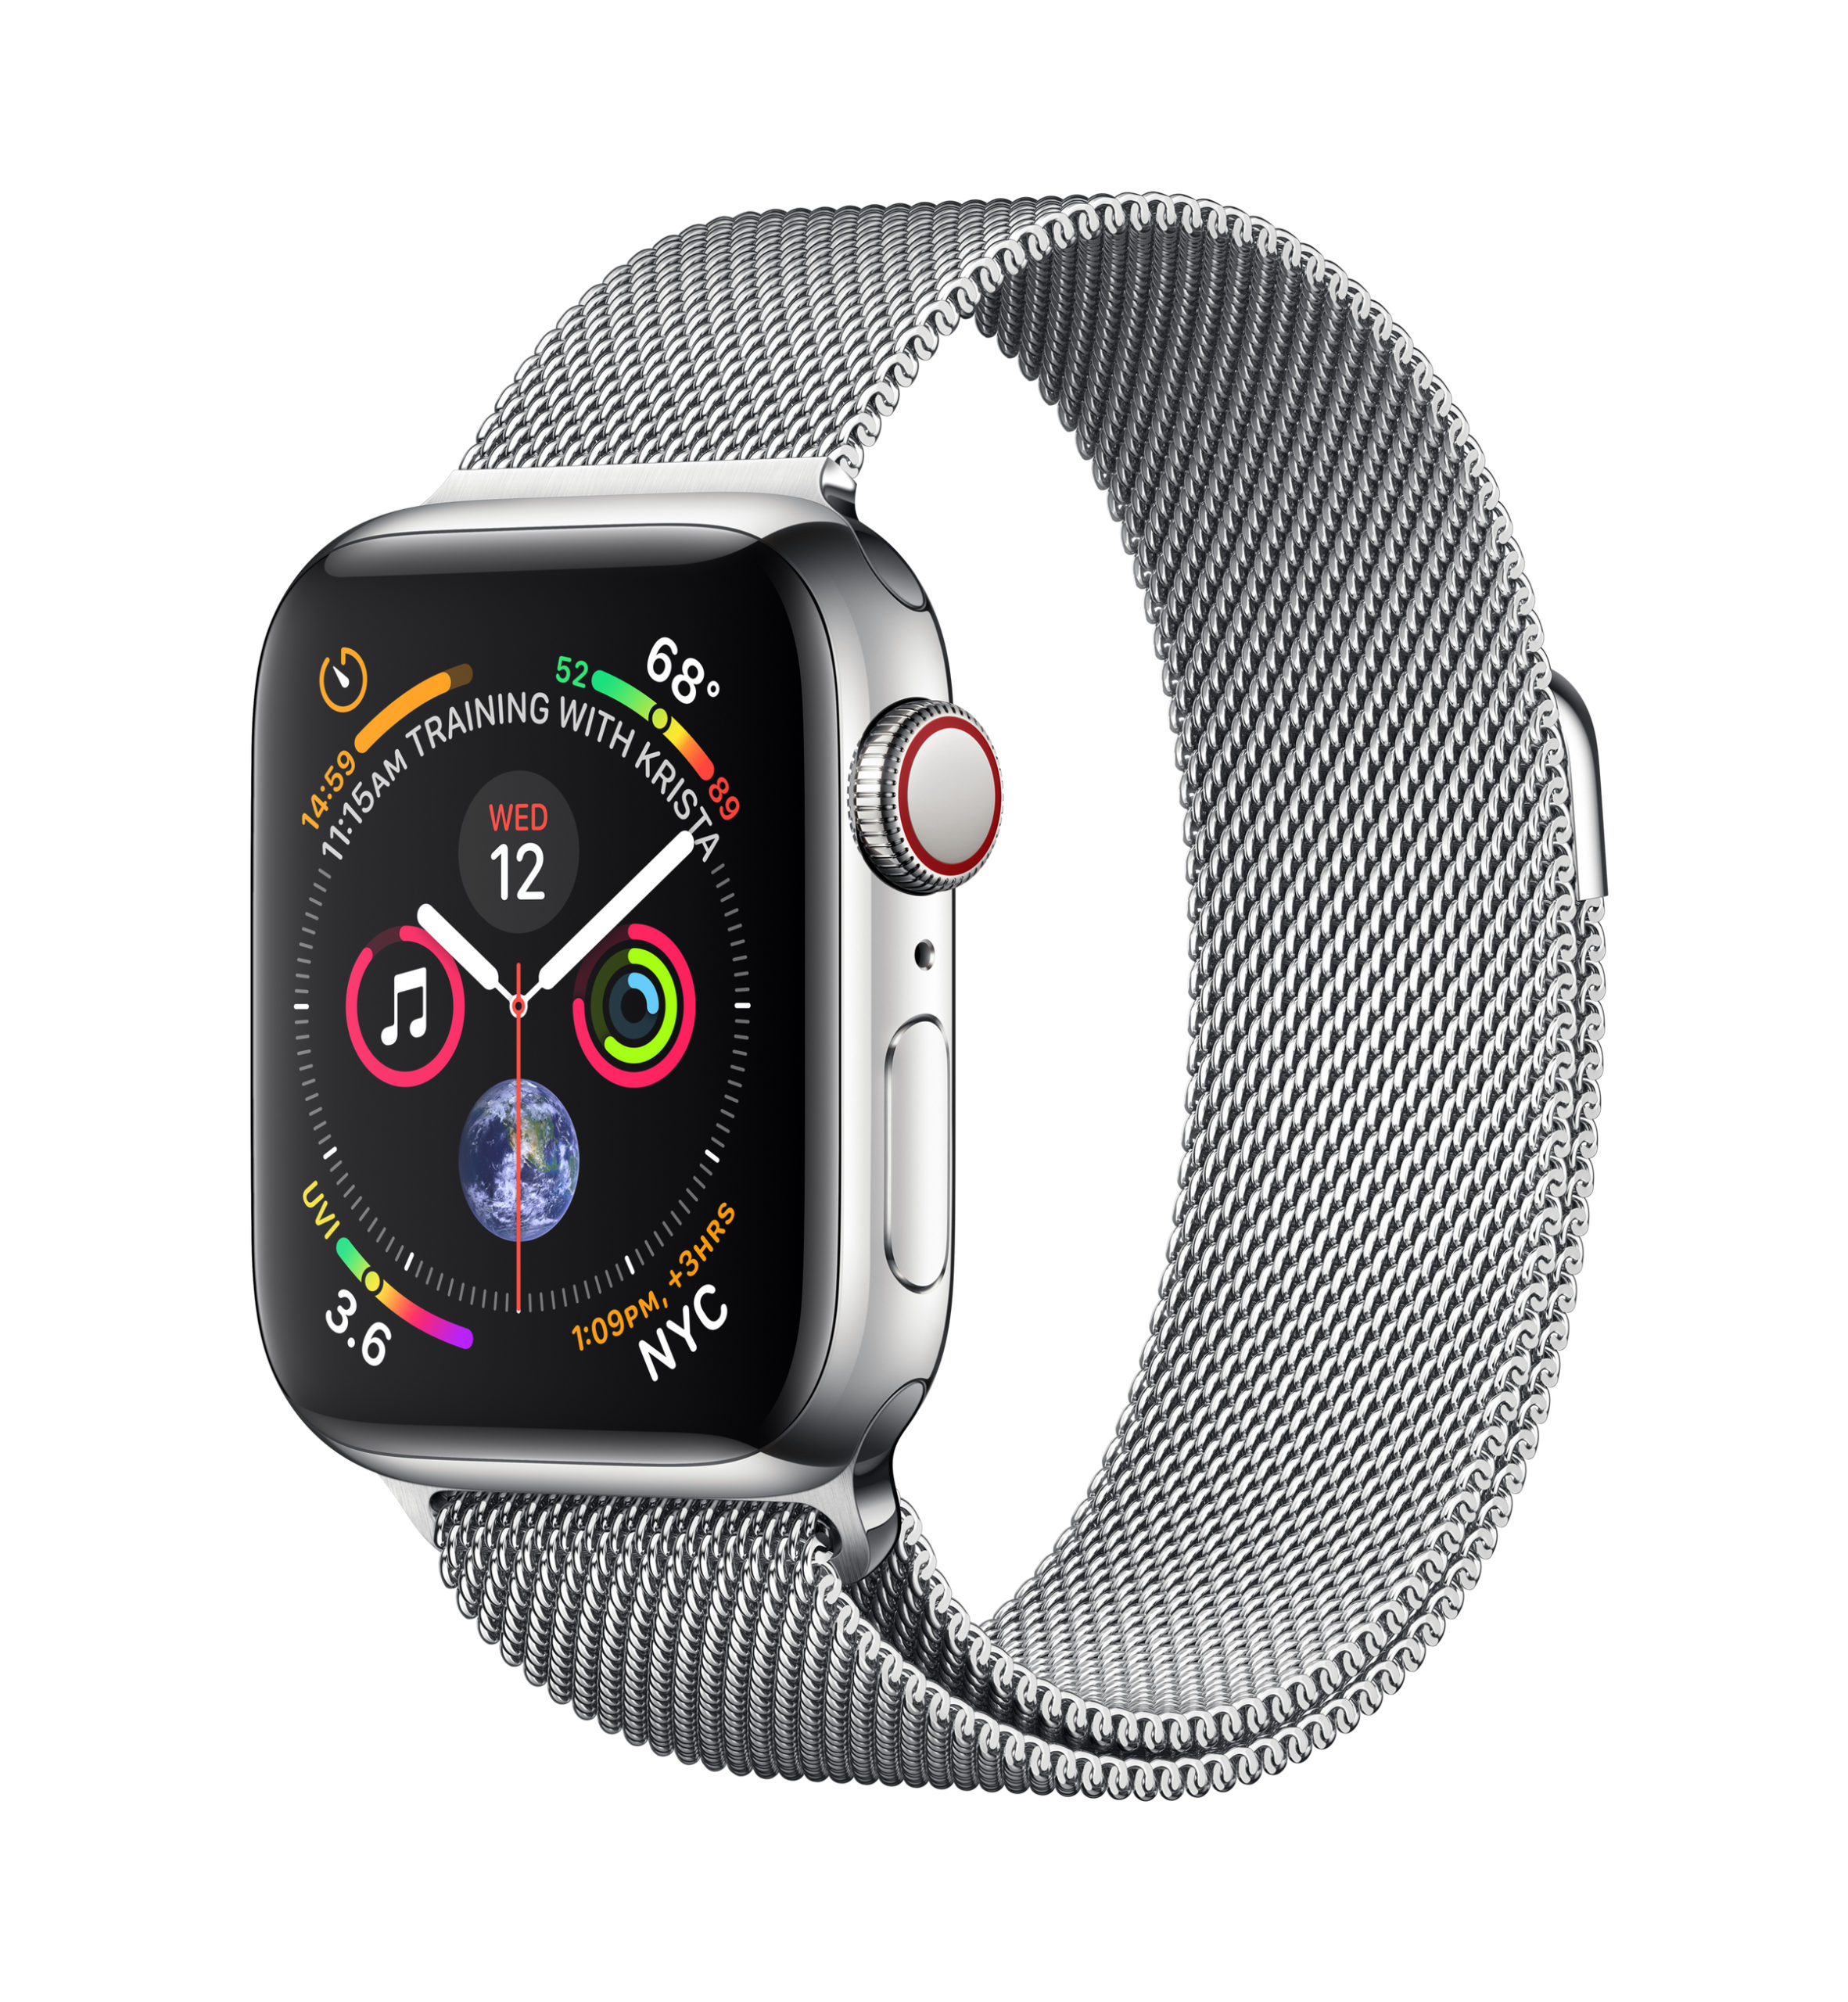 MTUM2LL/A - $289 - Apple Watch Series 4 (GPS + Cellular, 40mm, Stainless Steel, Milanese Loop)